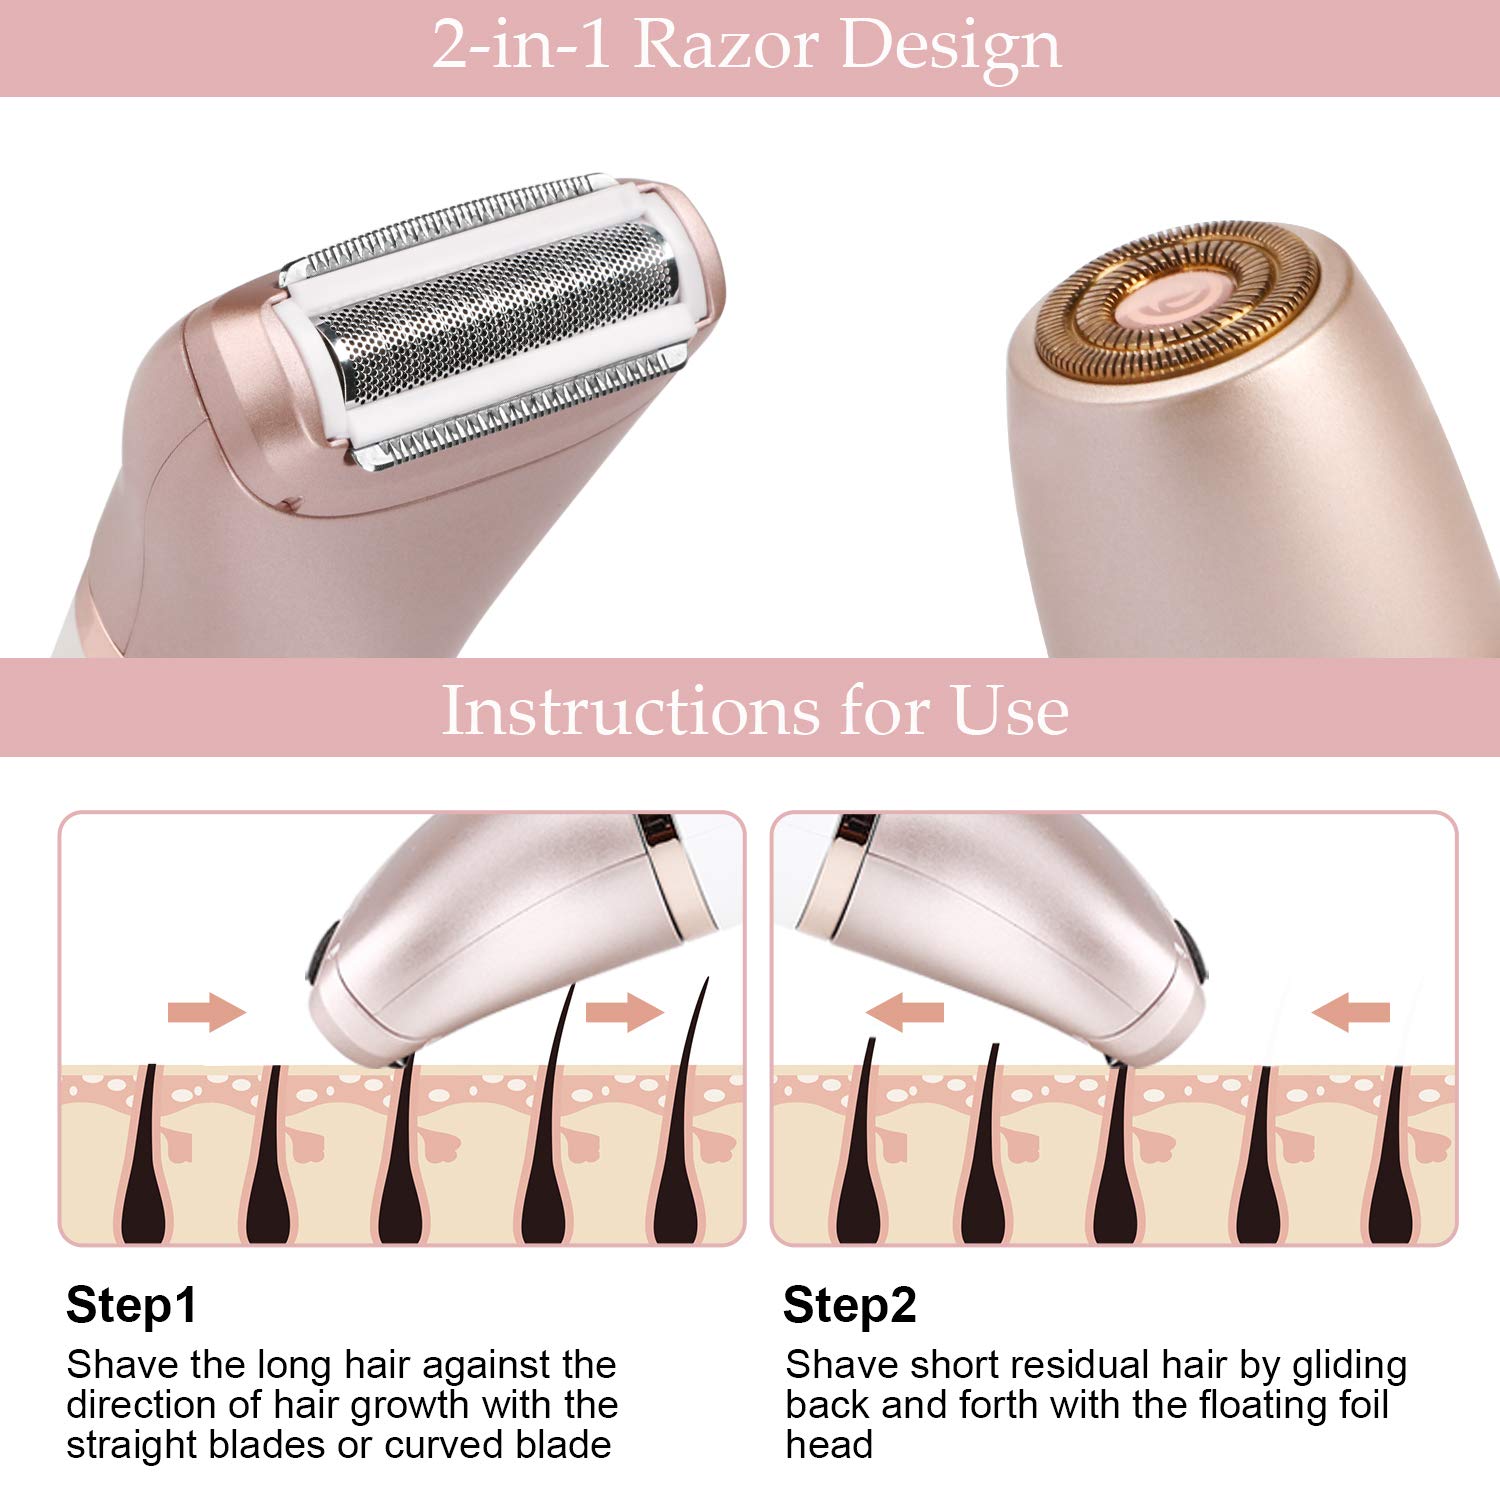 Electric Razor for Women - RenFox Women Electric Shaver 2 in 1 Wet & Dry USB Rechargeable Women Shaver for Legs Underarms and Bikini 2 Changeable Hair Removal Heads (Rose Gold)